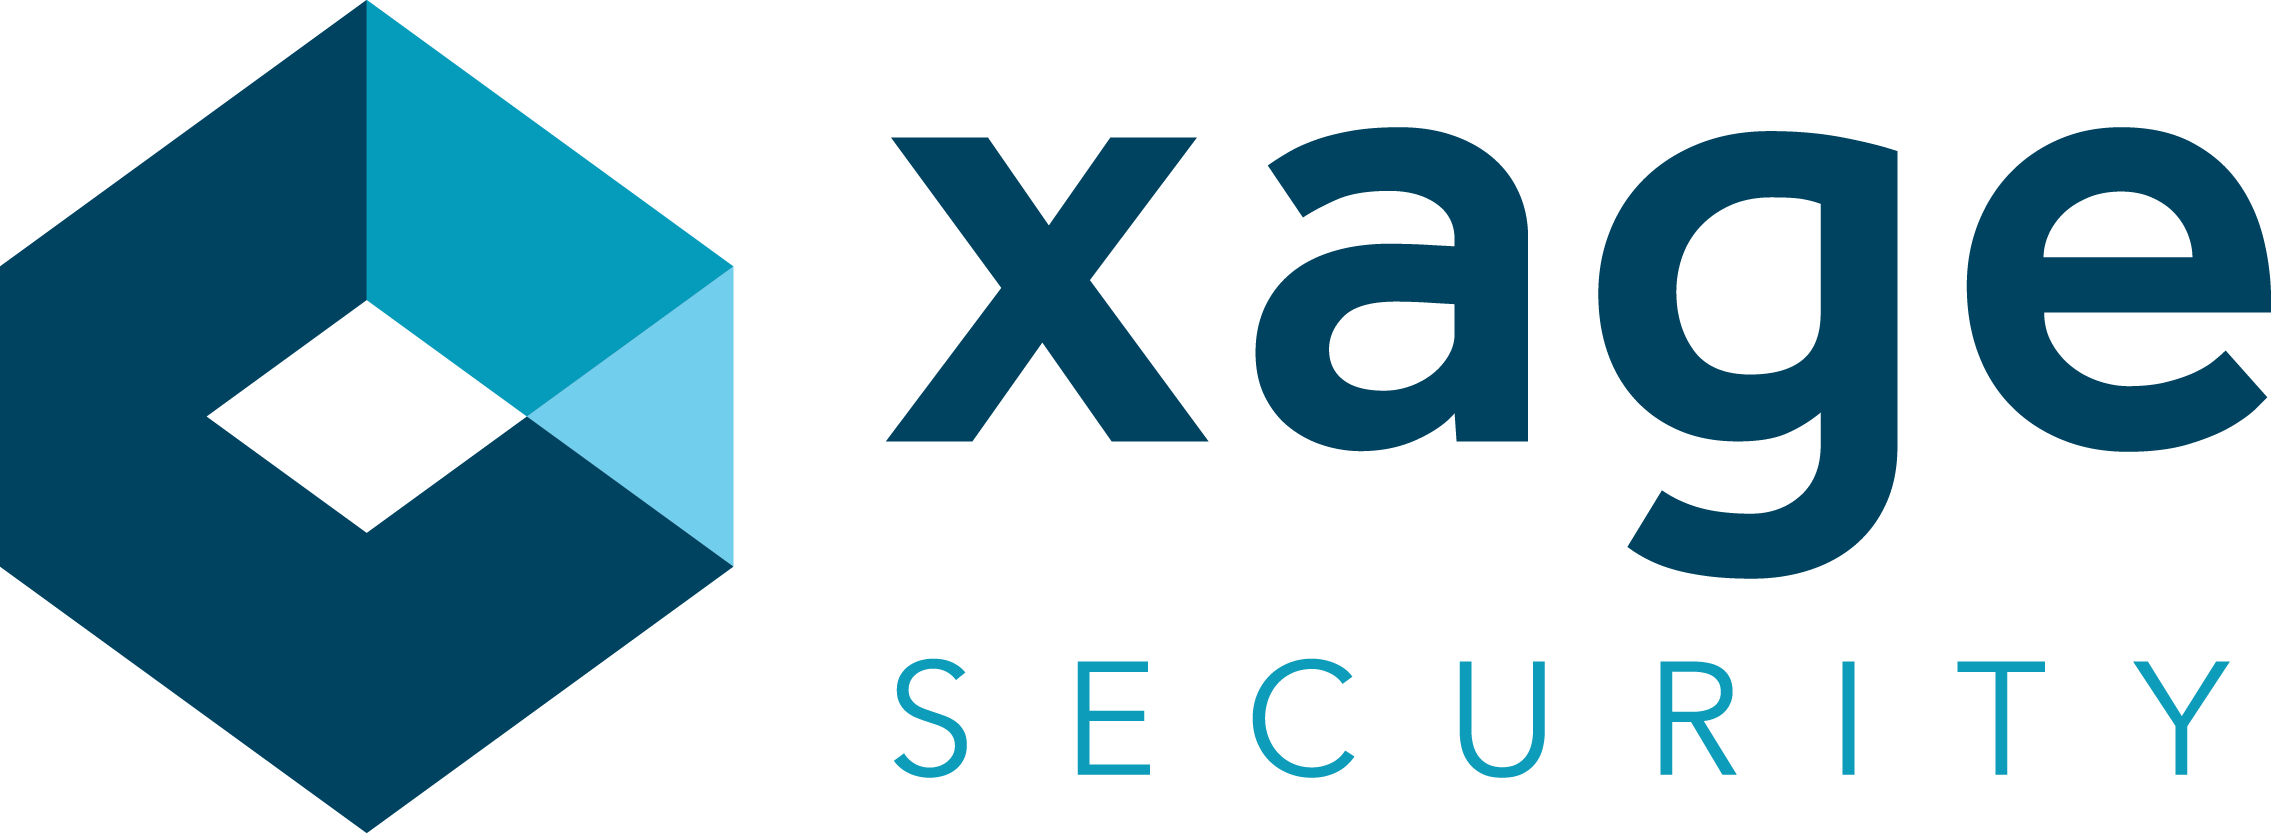 xage-logo-full-color.png